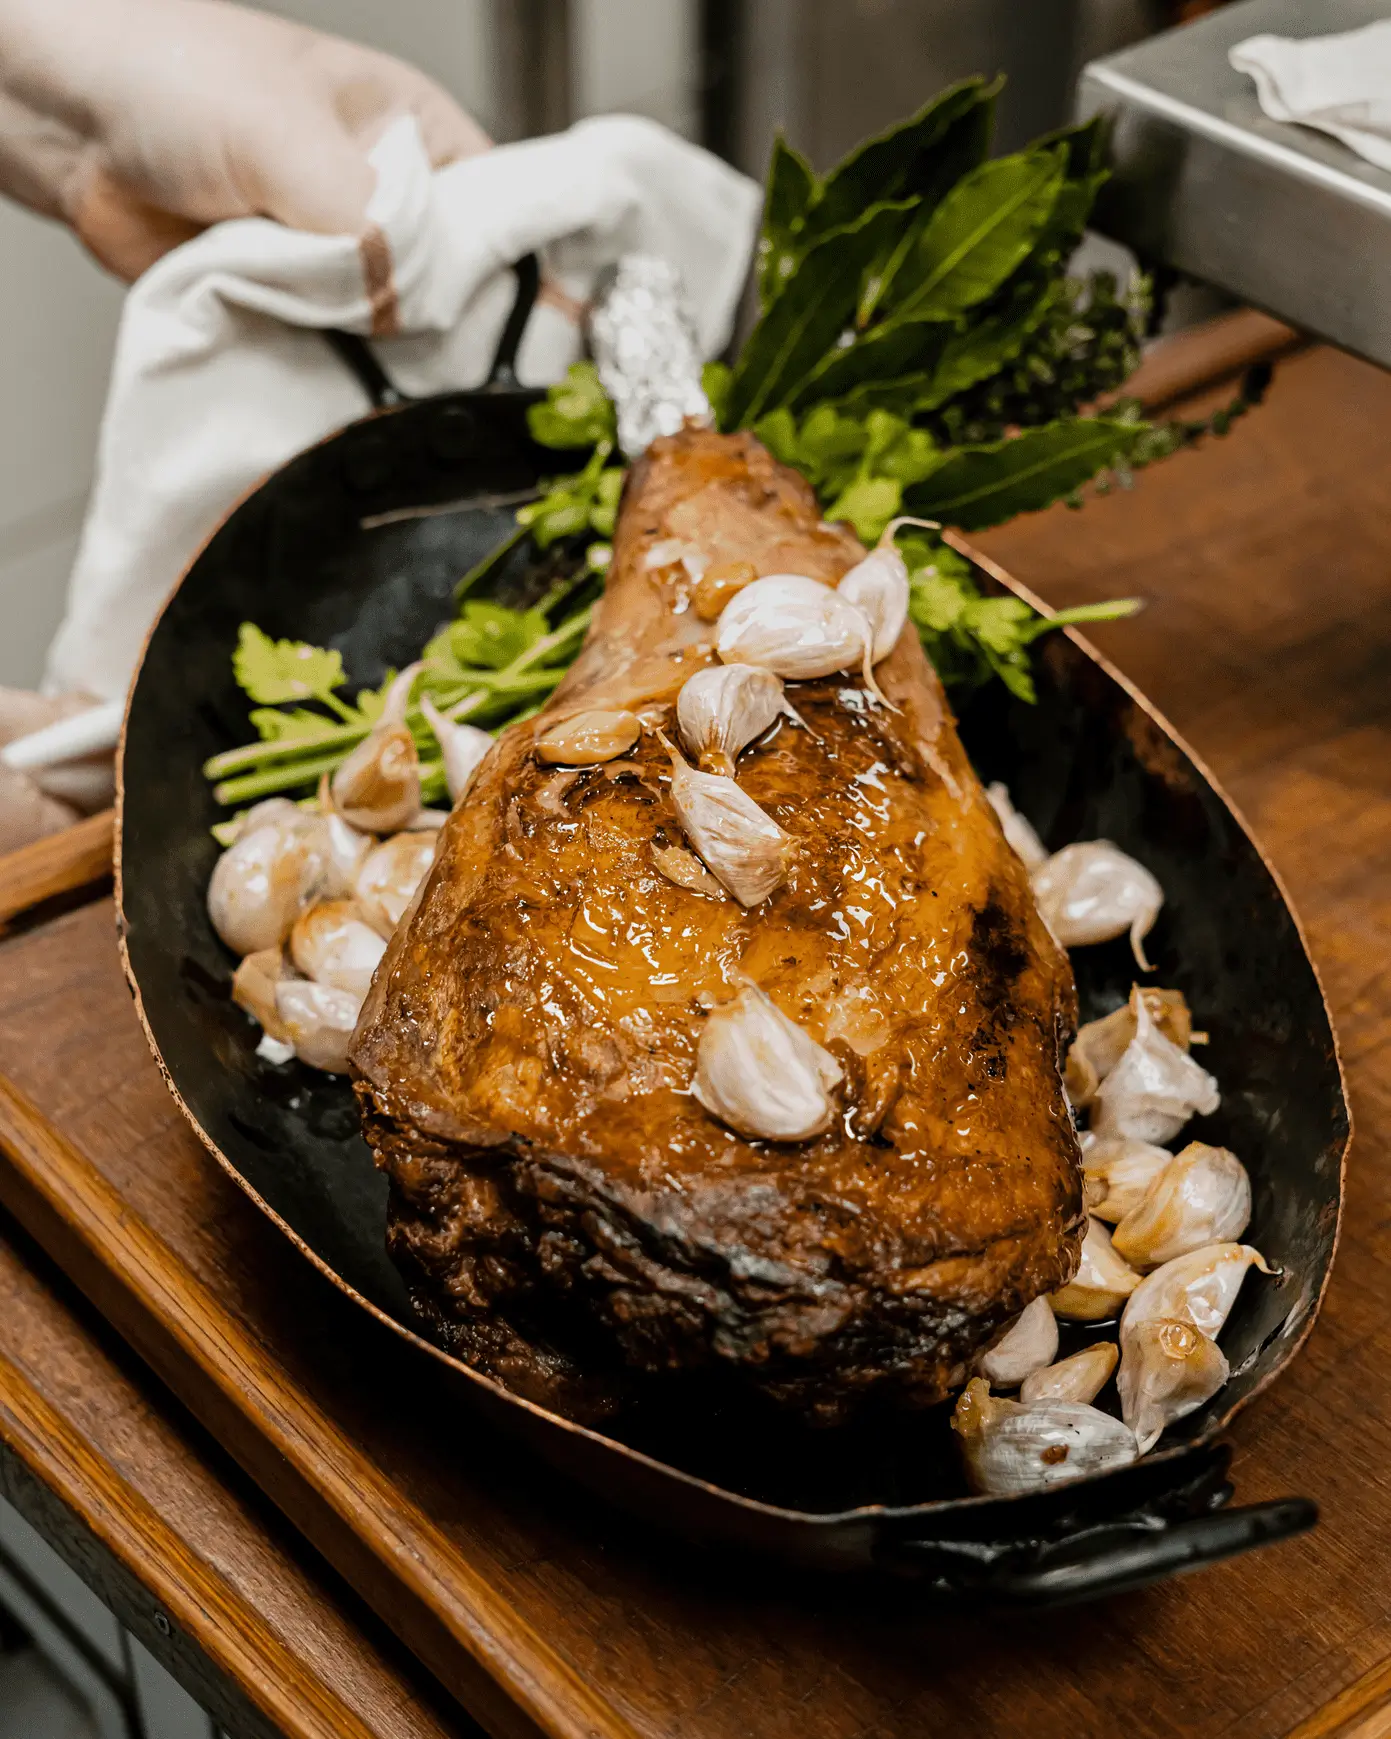 A succulent roasted leg of lamb garnished with whole garlic cloves, presented in a rustic skillet on a wooden surface, showcasing the classic cuisine at Chez Georges, a traditional French bistro in Paris.